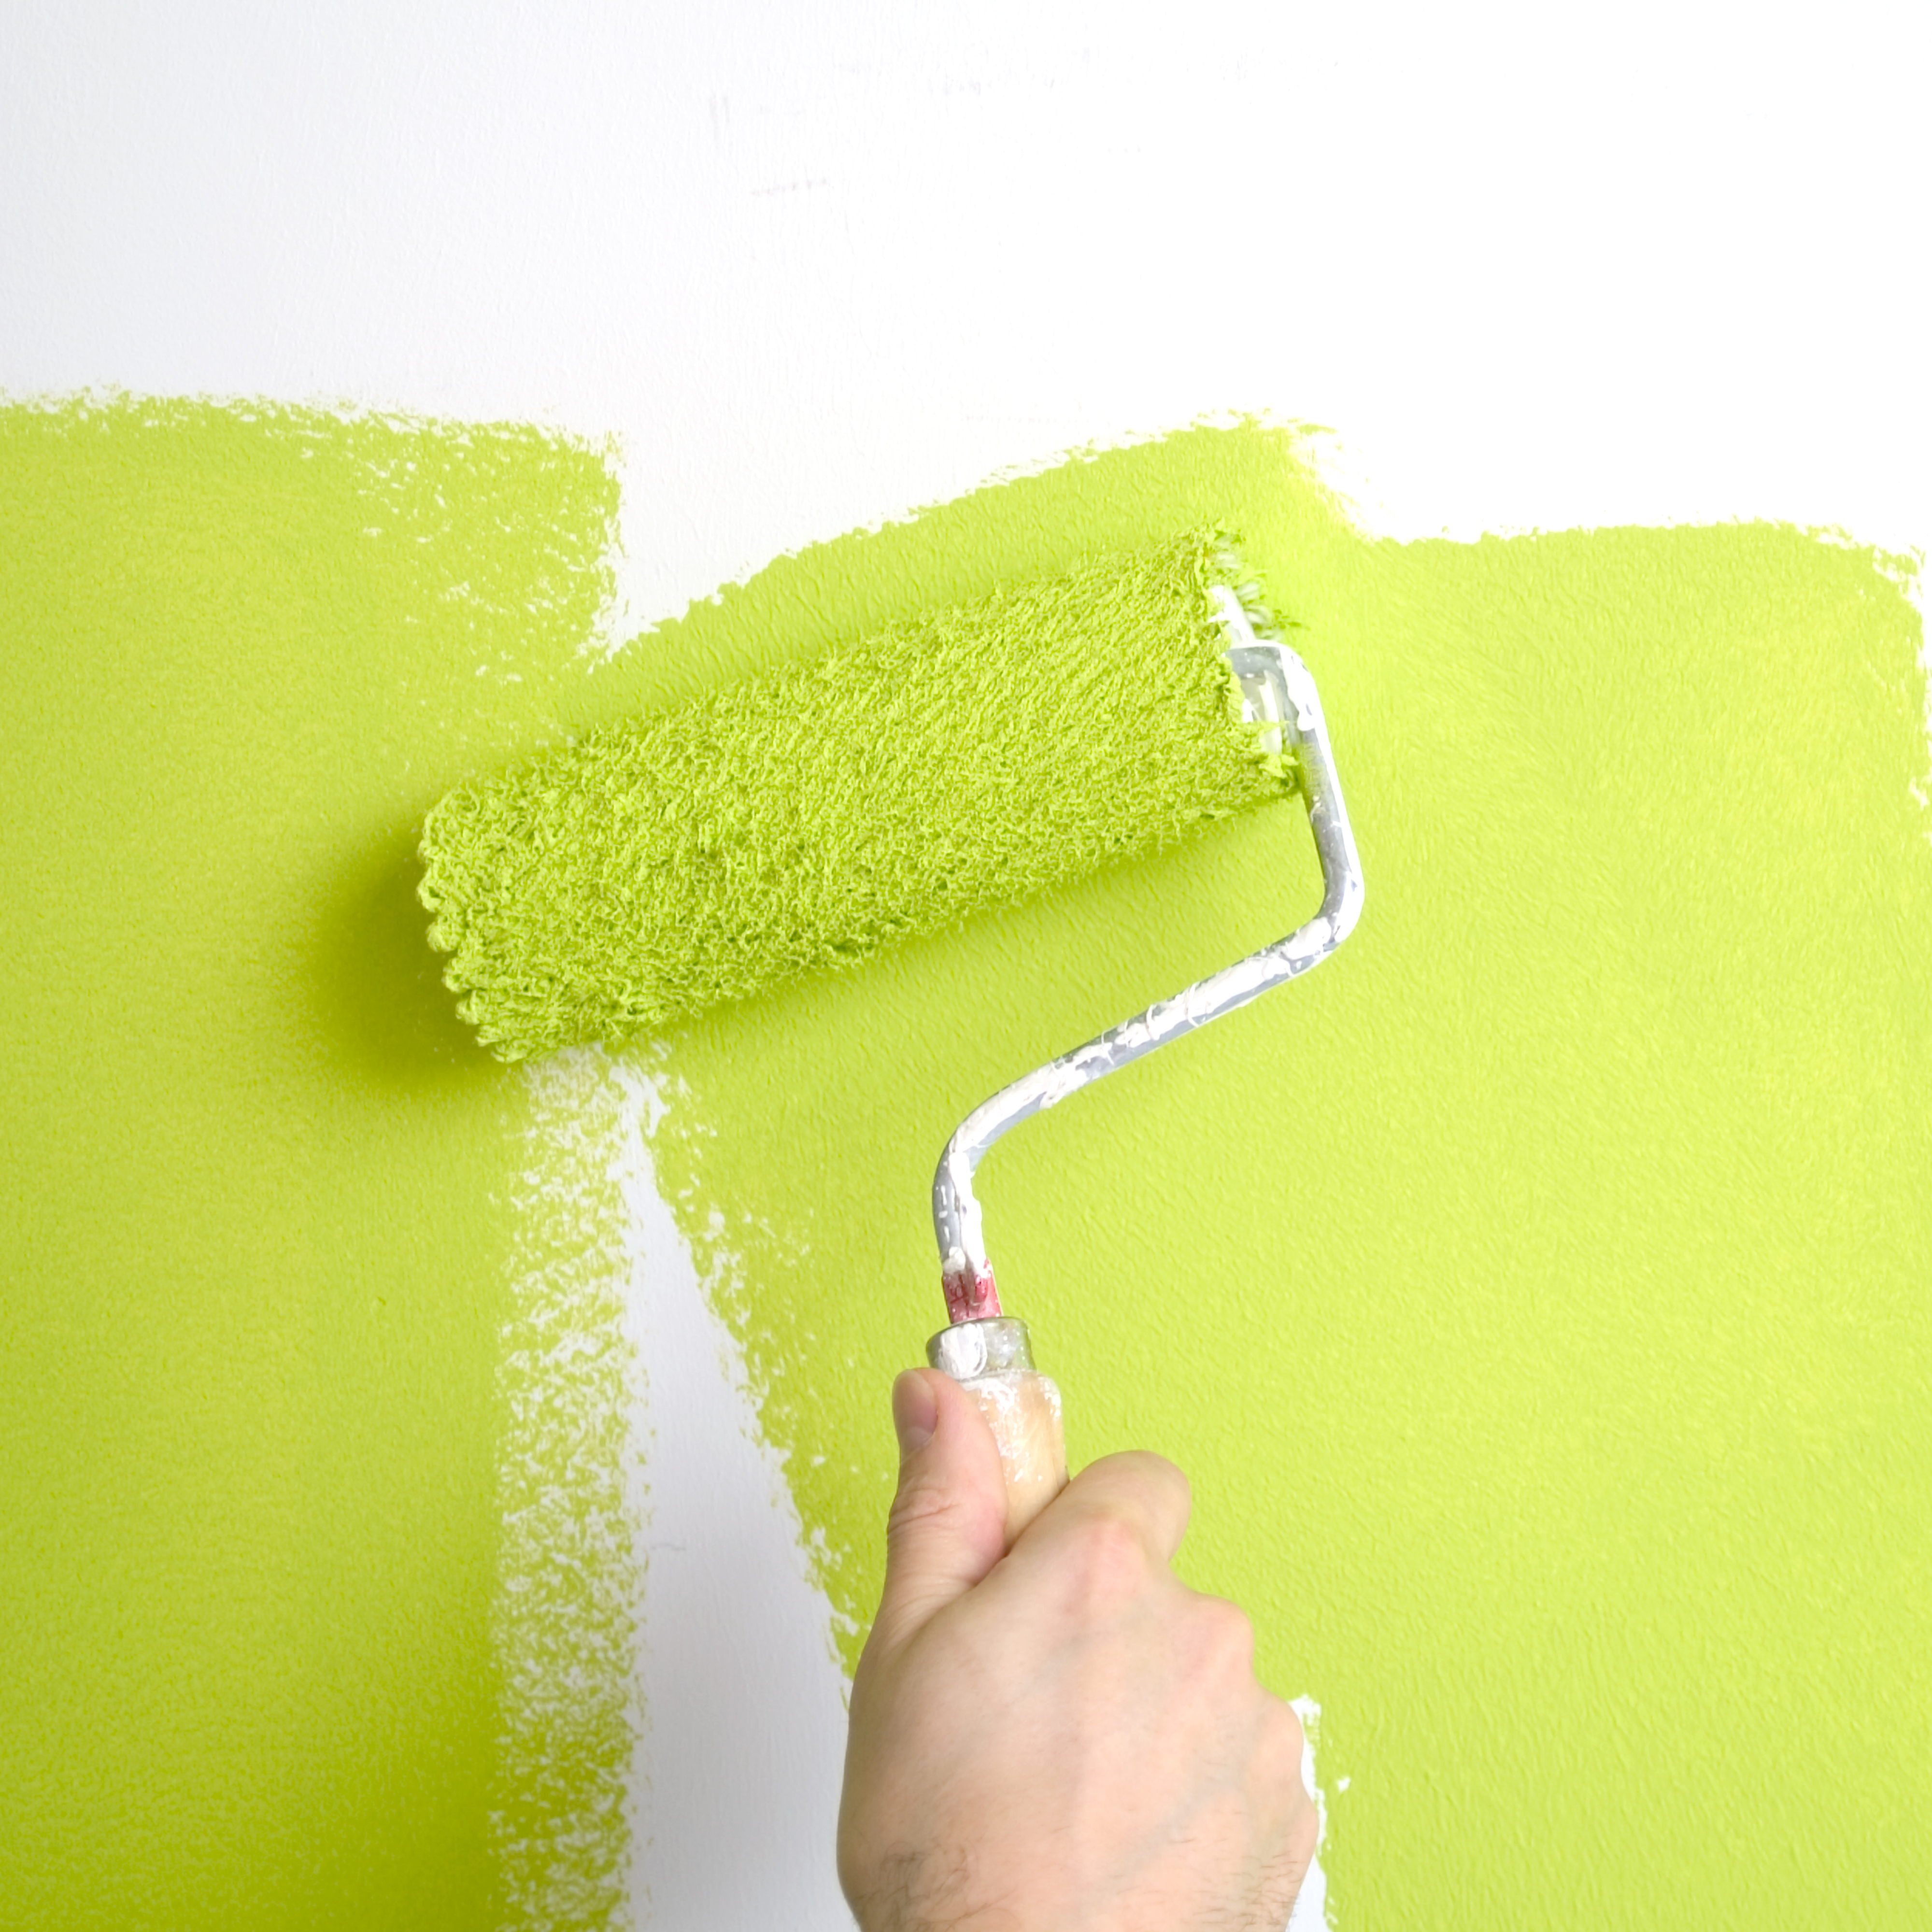 A Fresh Coat Can Lead to a Fresh Look | Shorewest Latest News ...